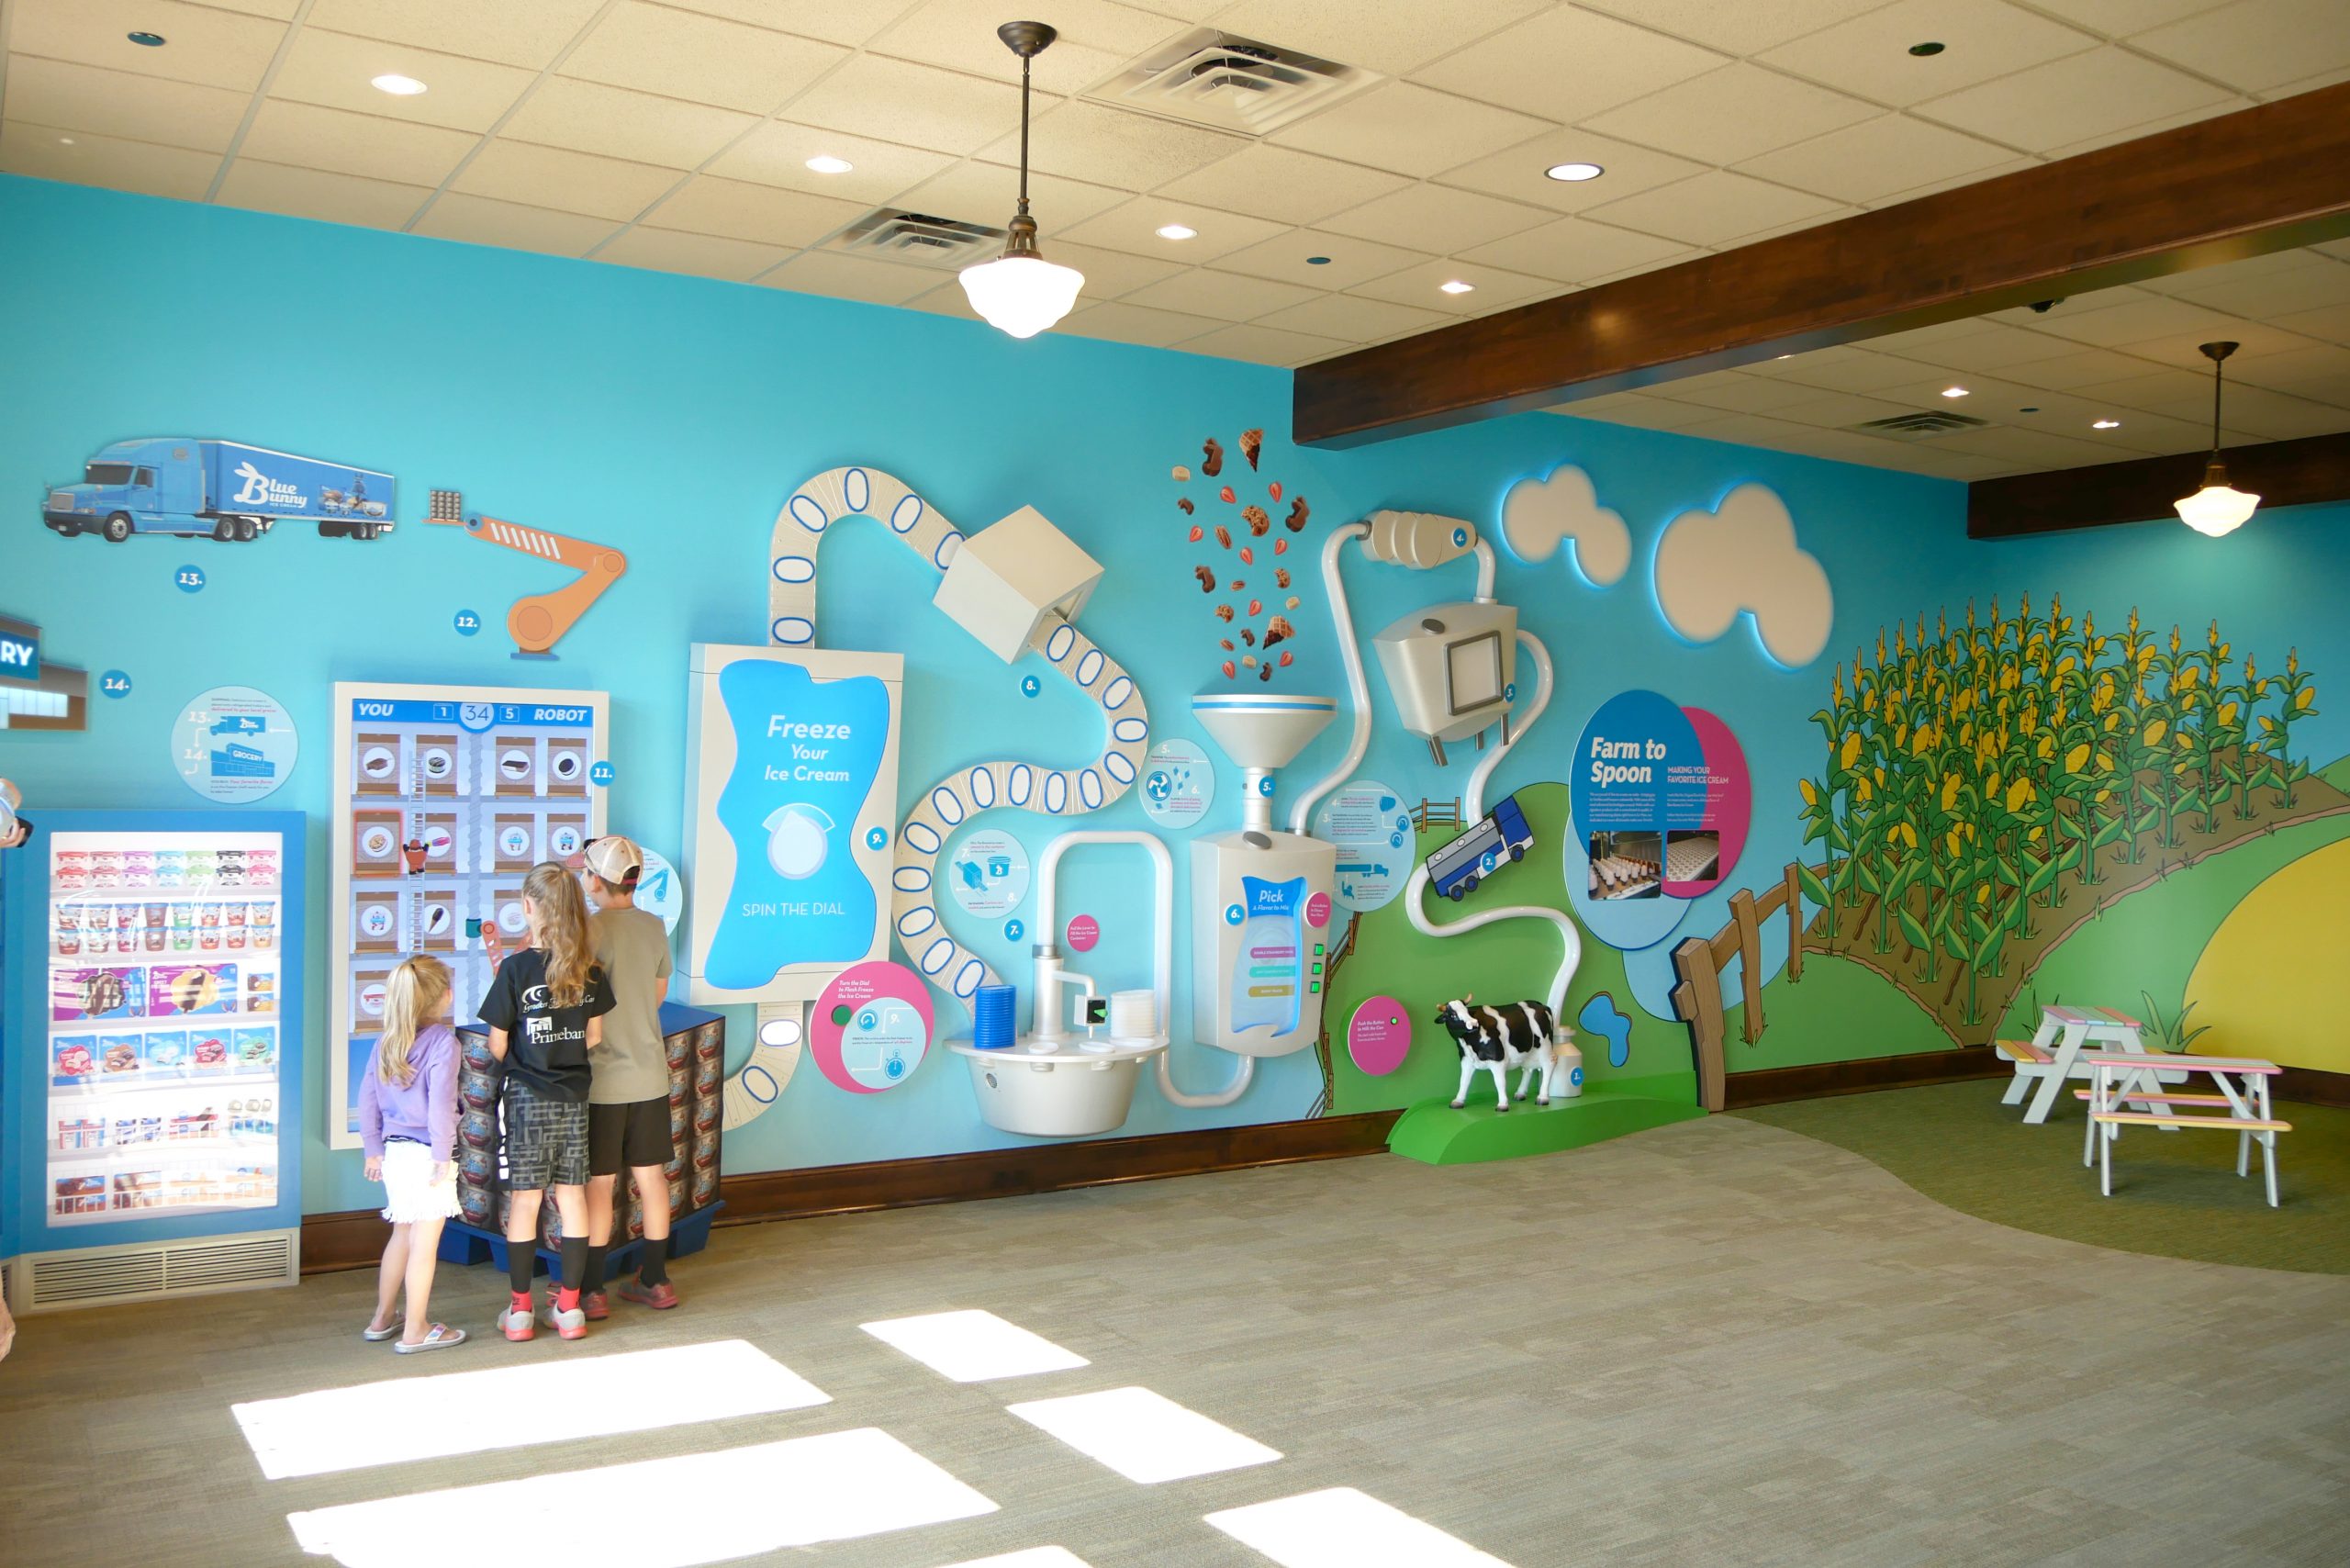 Side view of interactive wall where kids explore how ice cream is made. Wall has graphics of a farm including cows and corn fields.